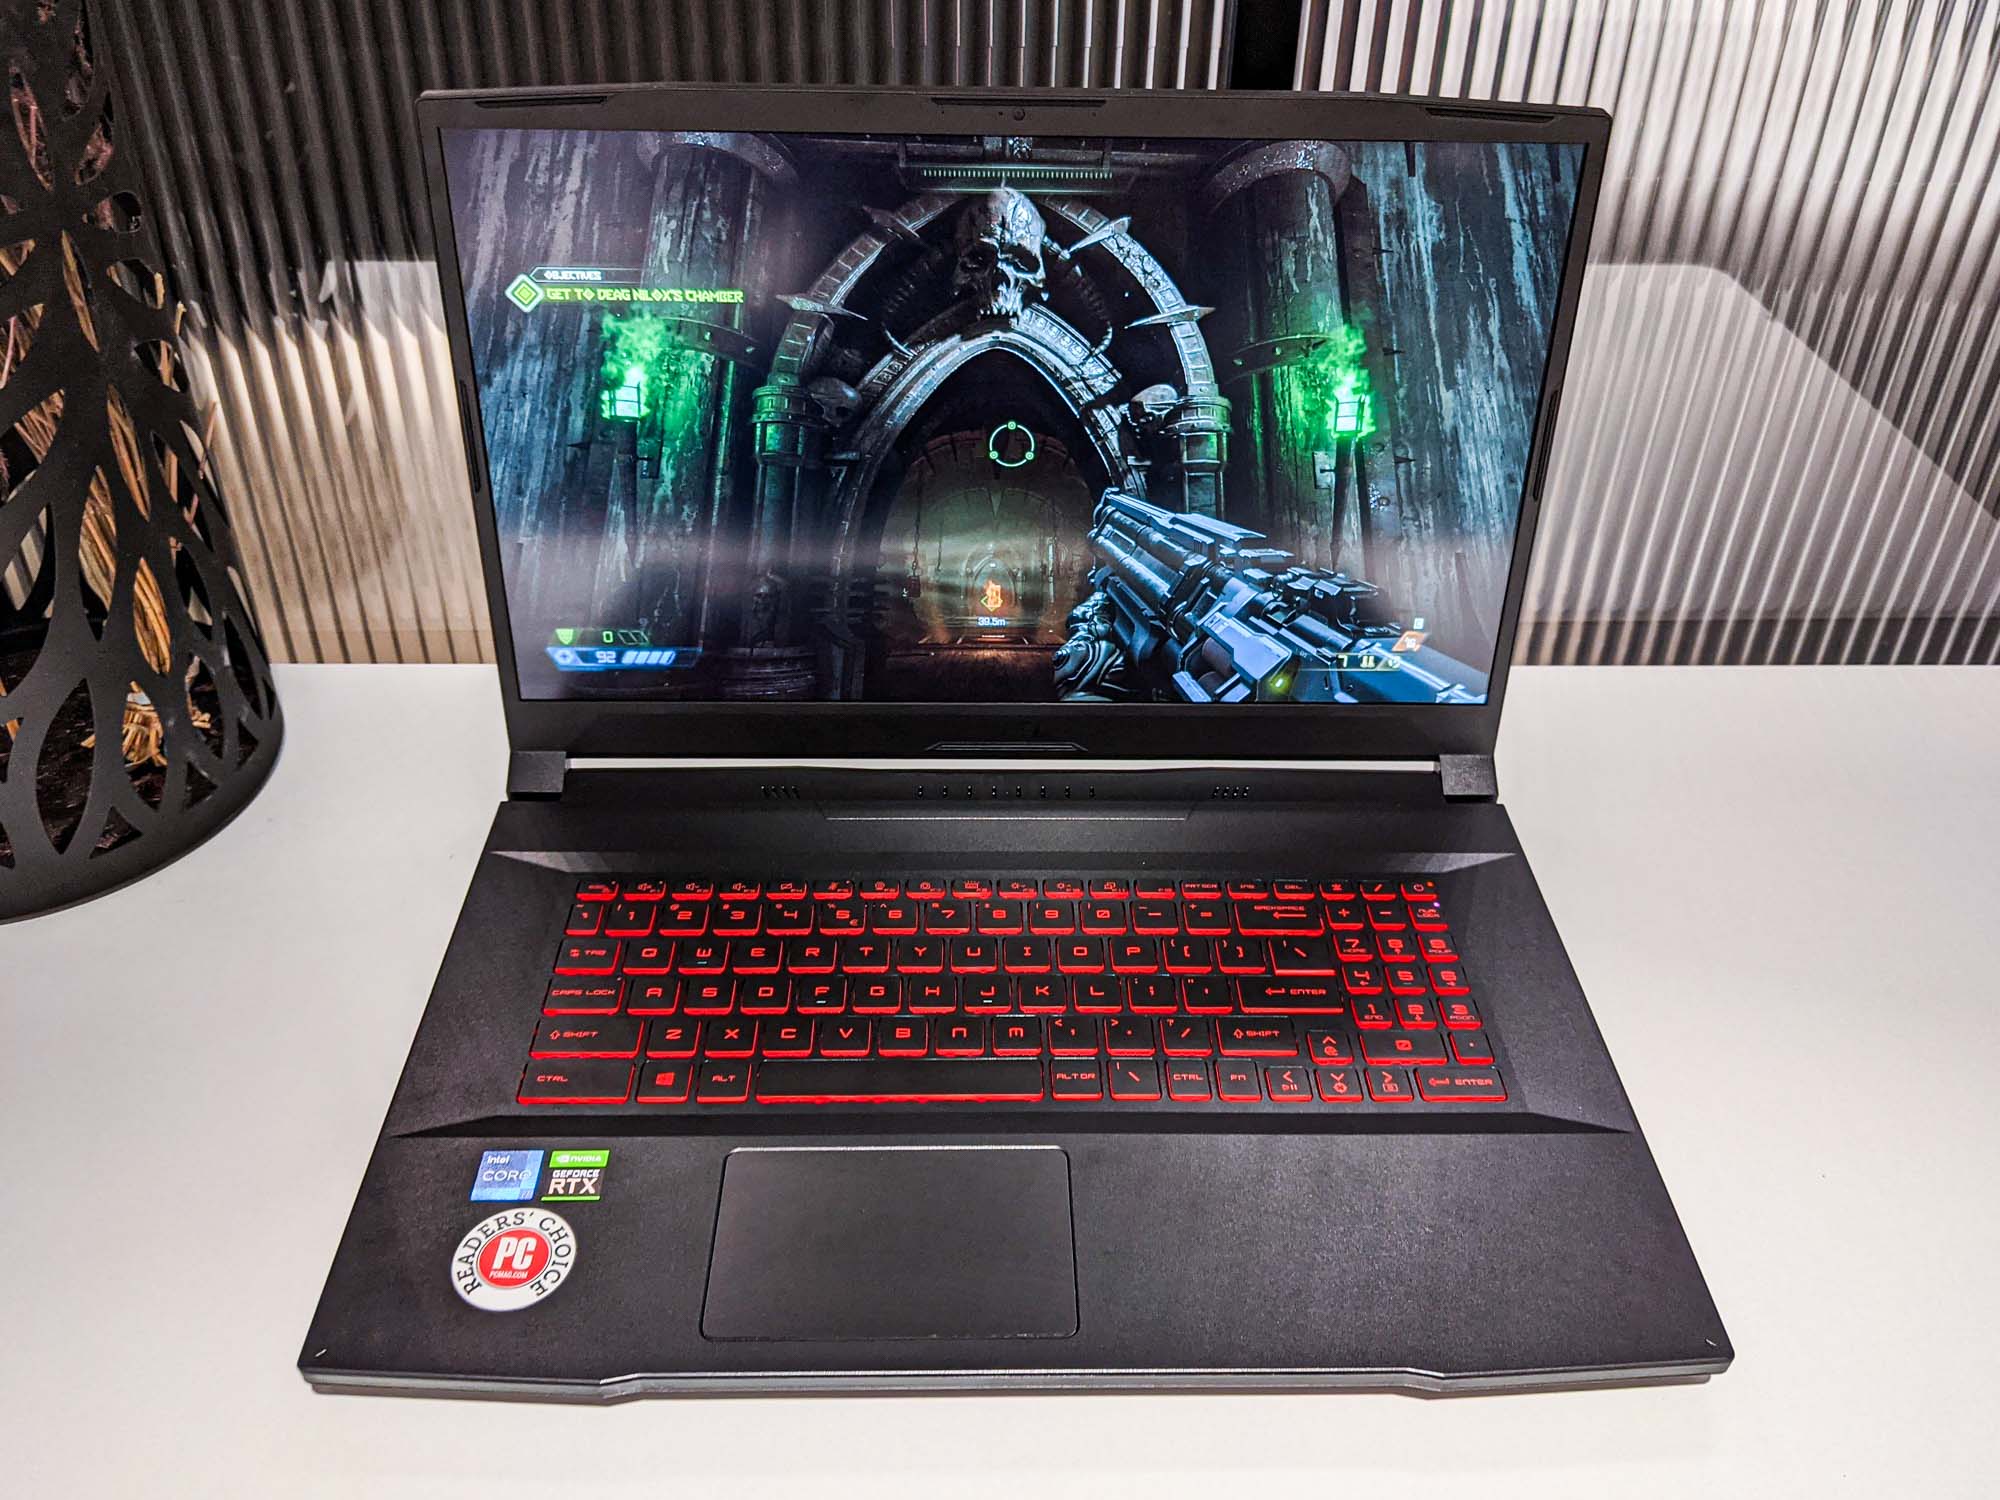 A first-person shooter running on the MSI Katana GF76.